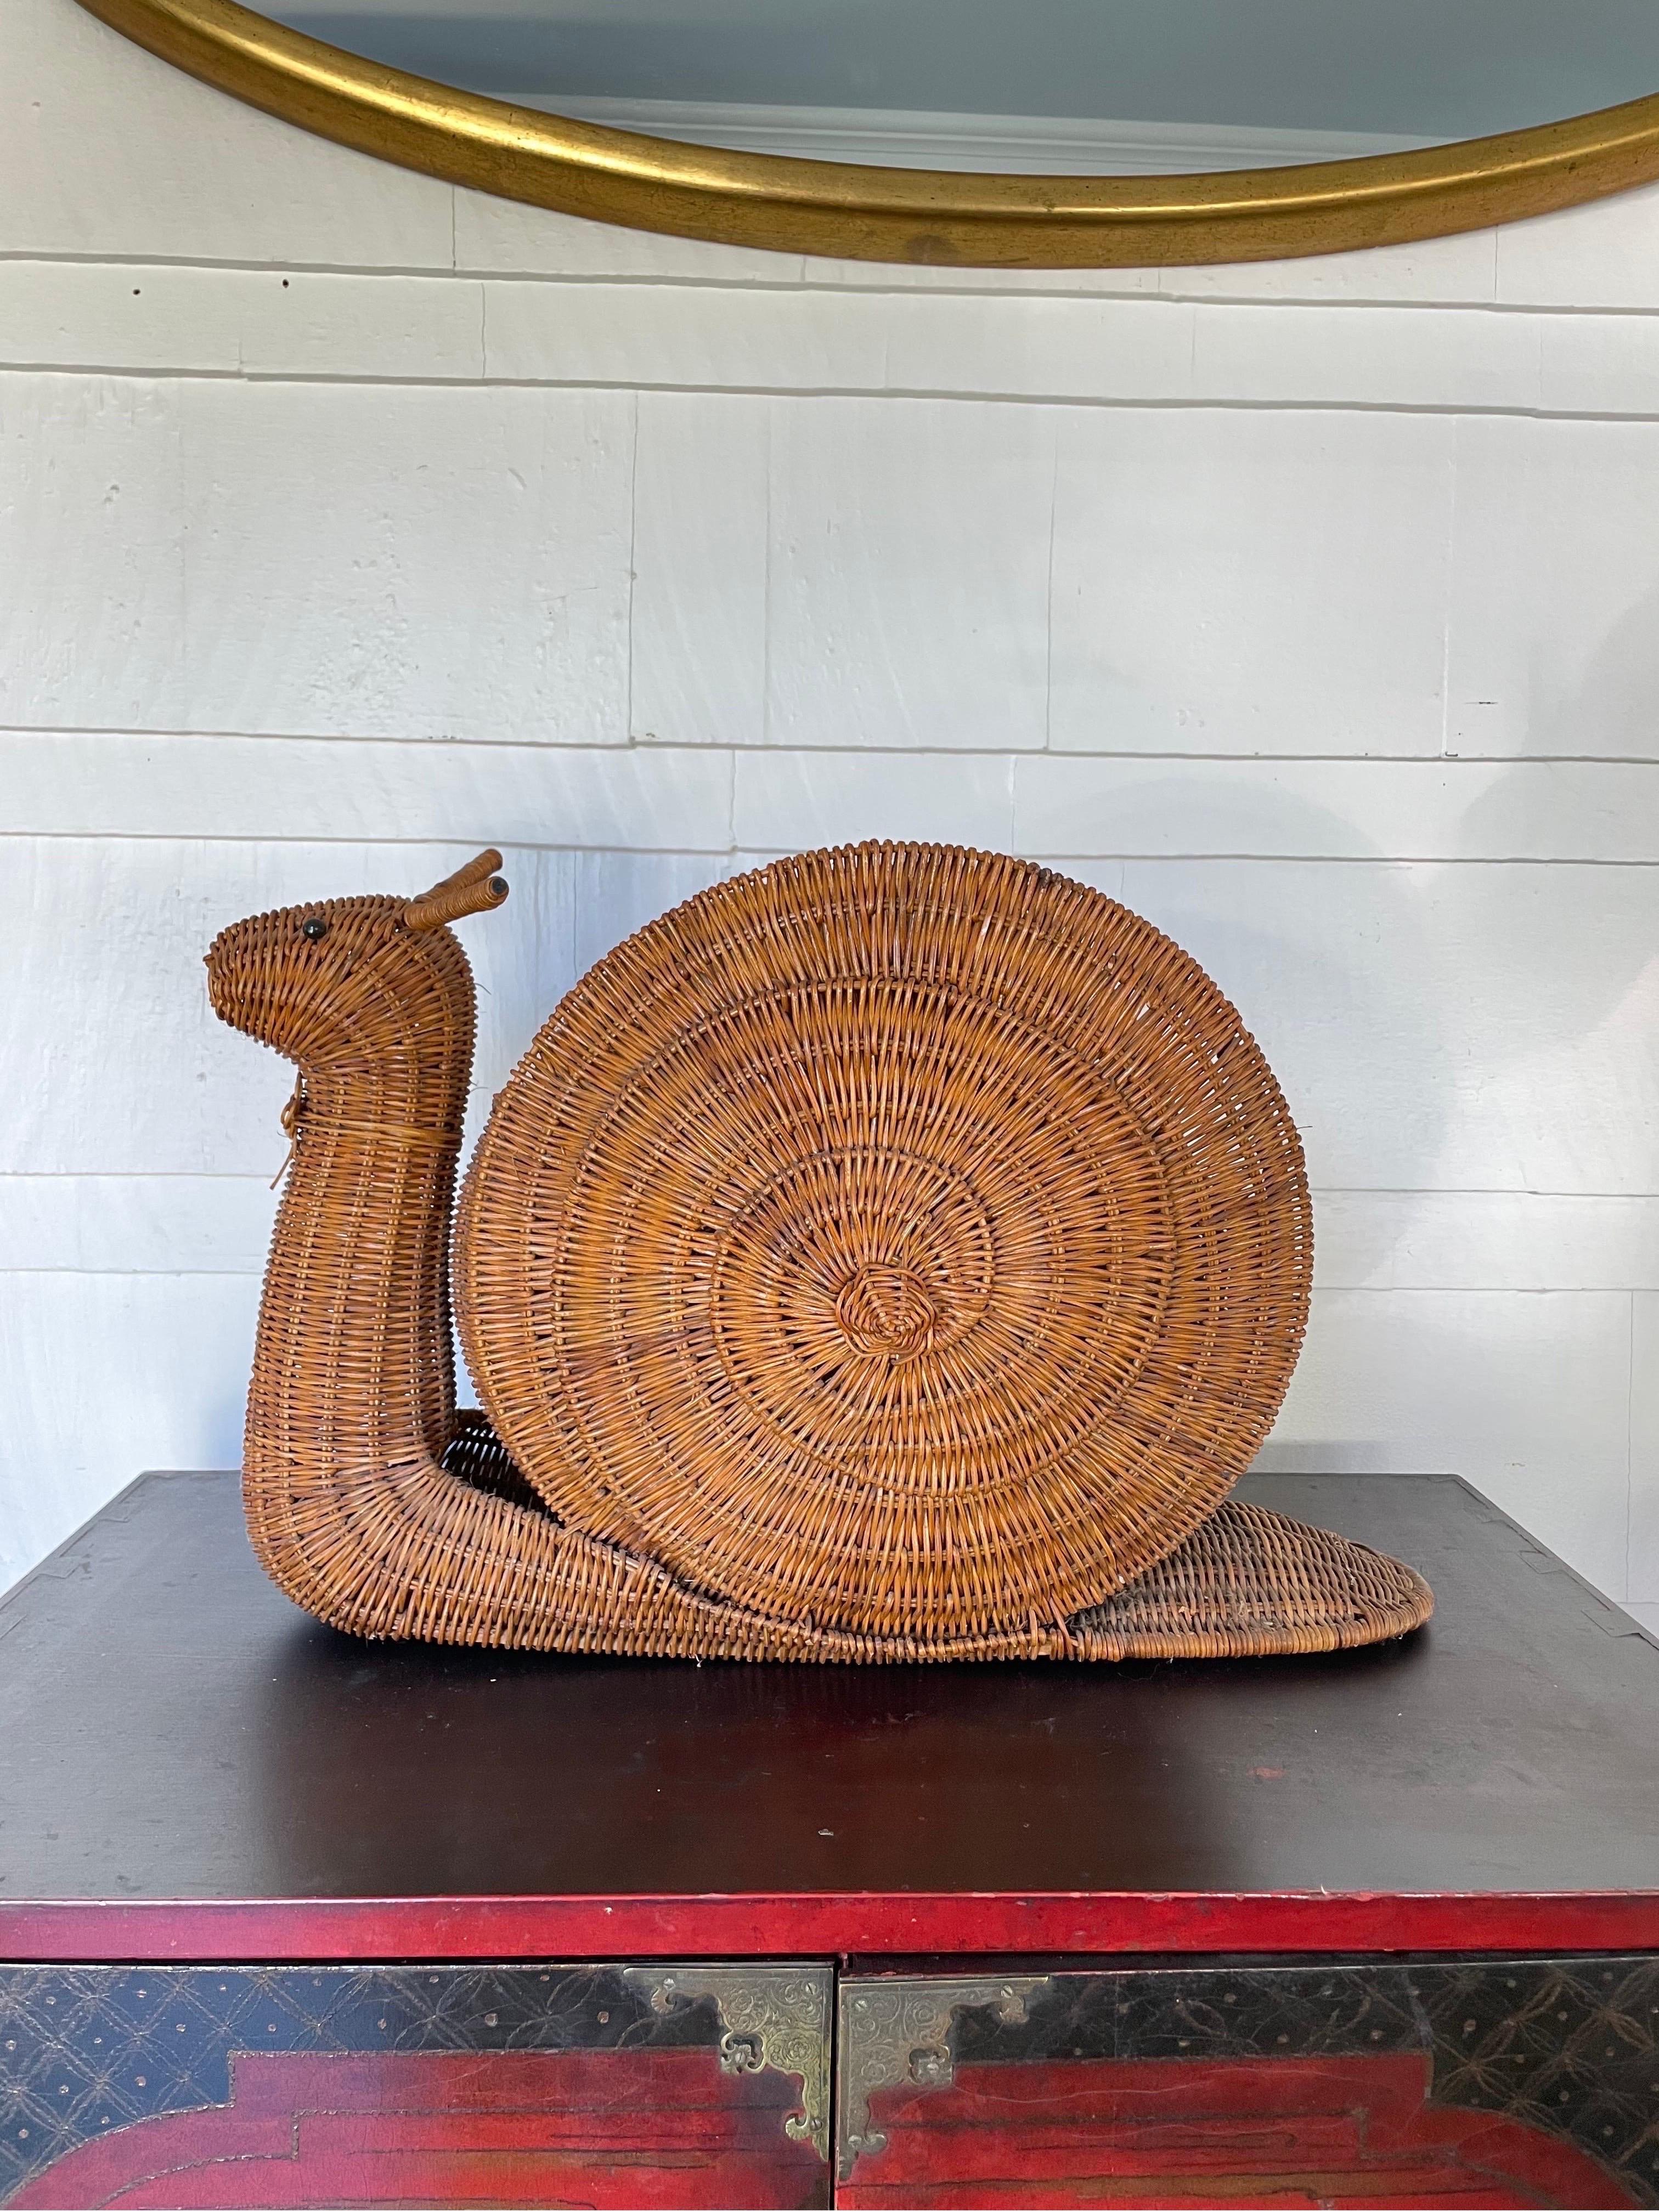 Charming mid century wicker or reed magazine stand in shape of a snail. The storage section is a snail shell in a nautilus pattern. The snail with fully equiped antennae is sporting a collar with a bow. Style meets function in a mellow, organic